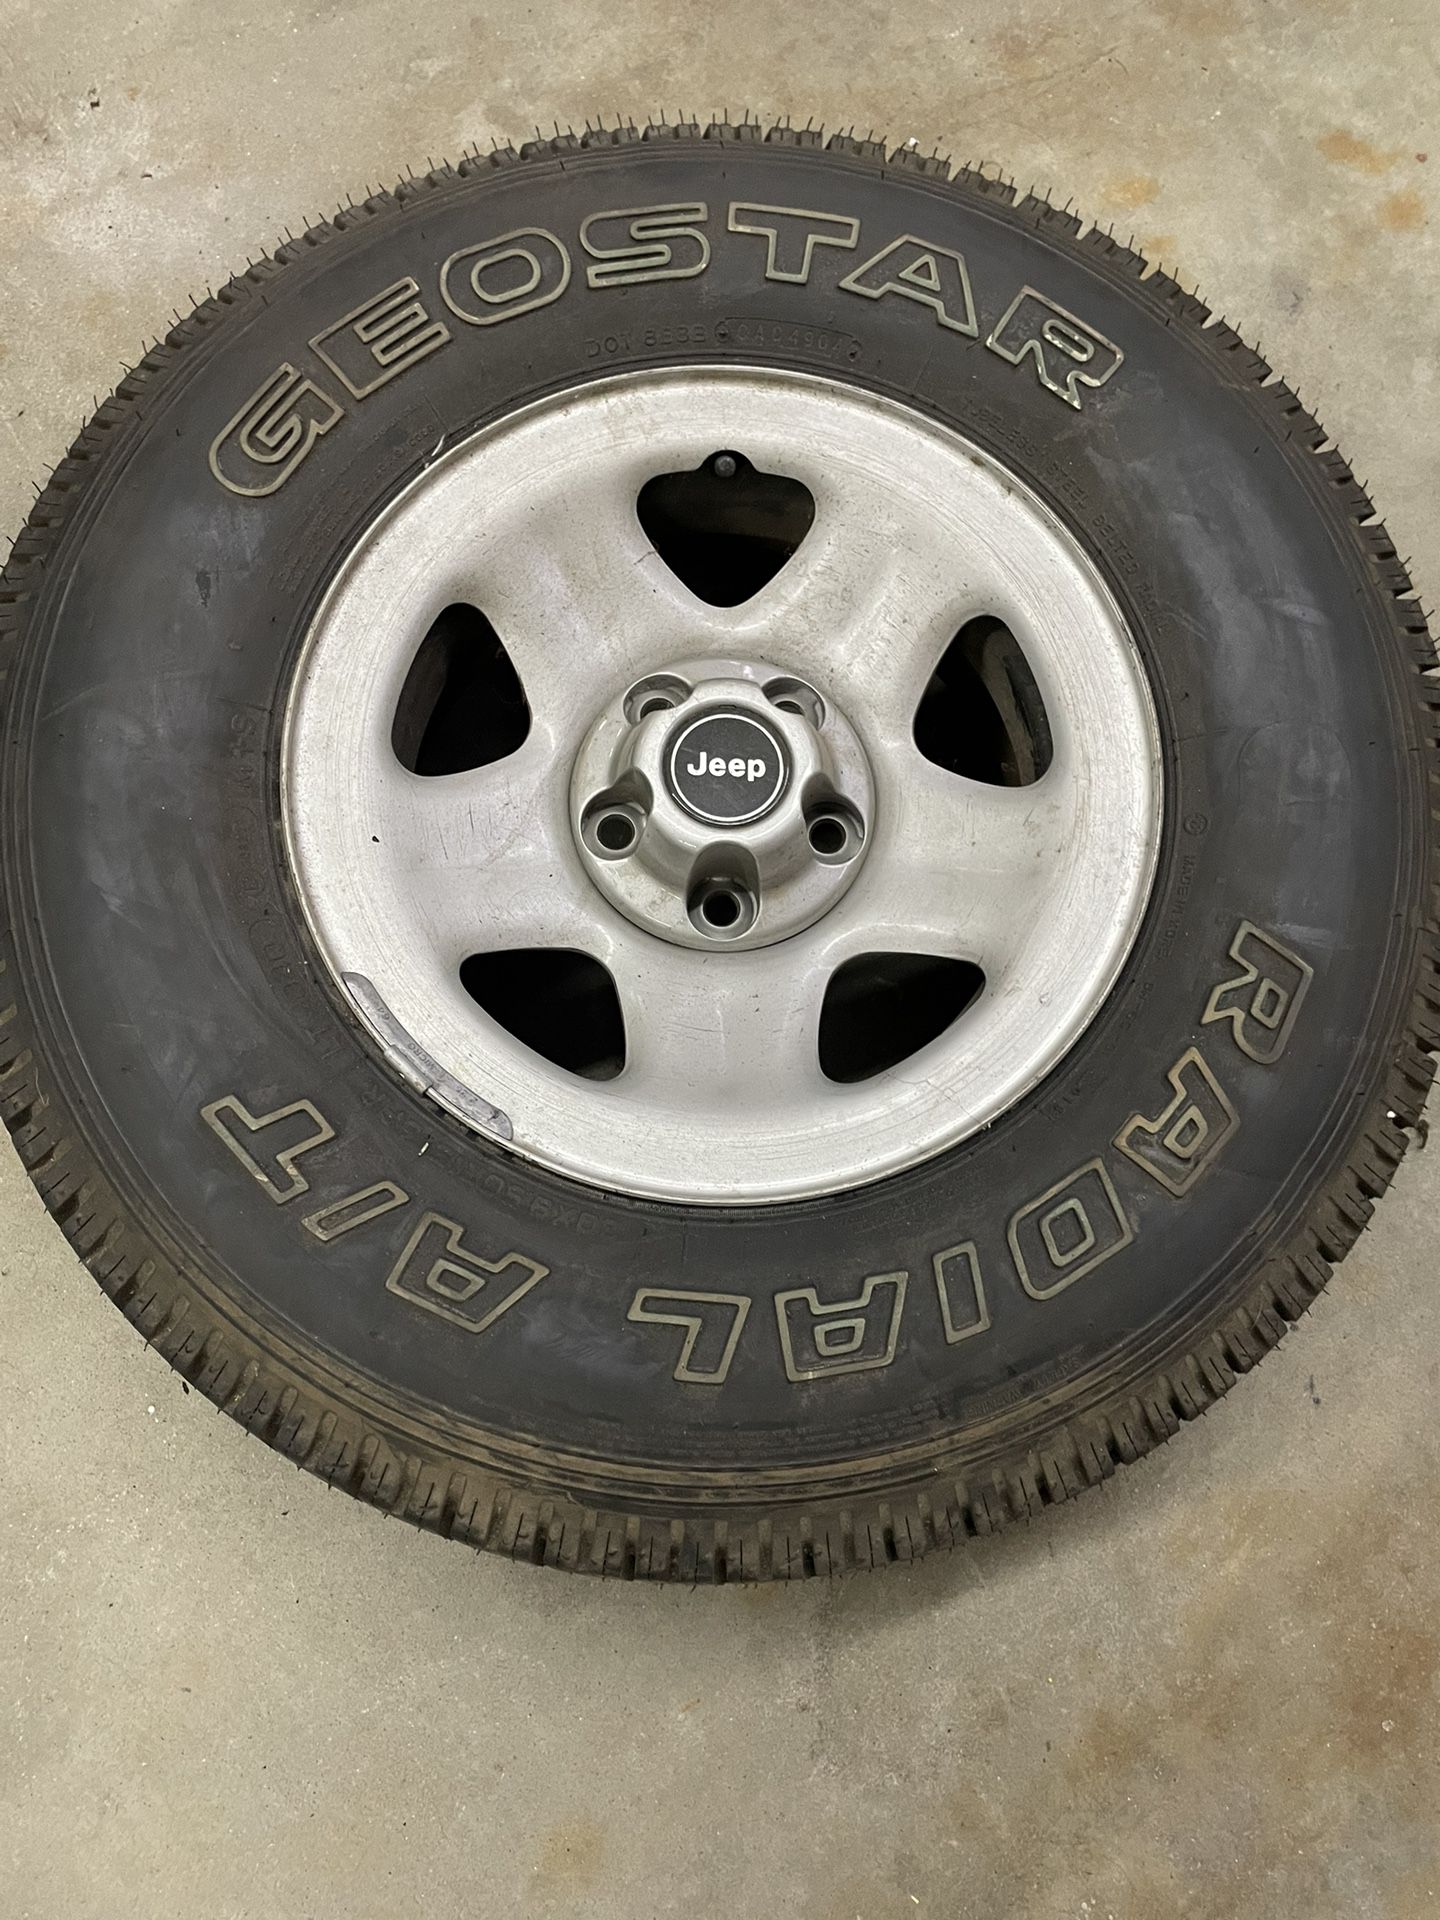 Jeep 15" Steel Wheel With 30x9.5 Tire.